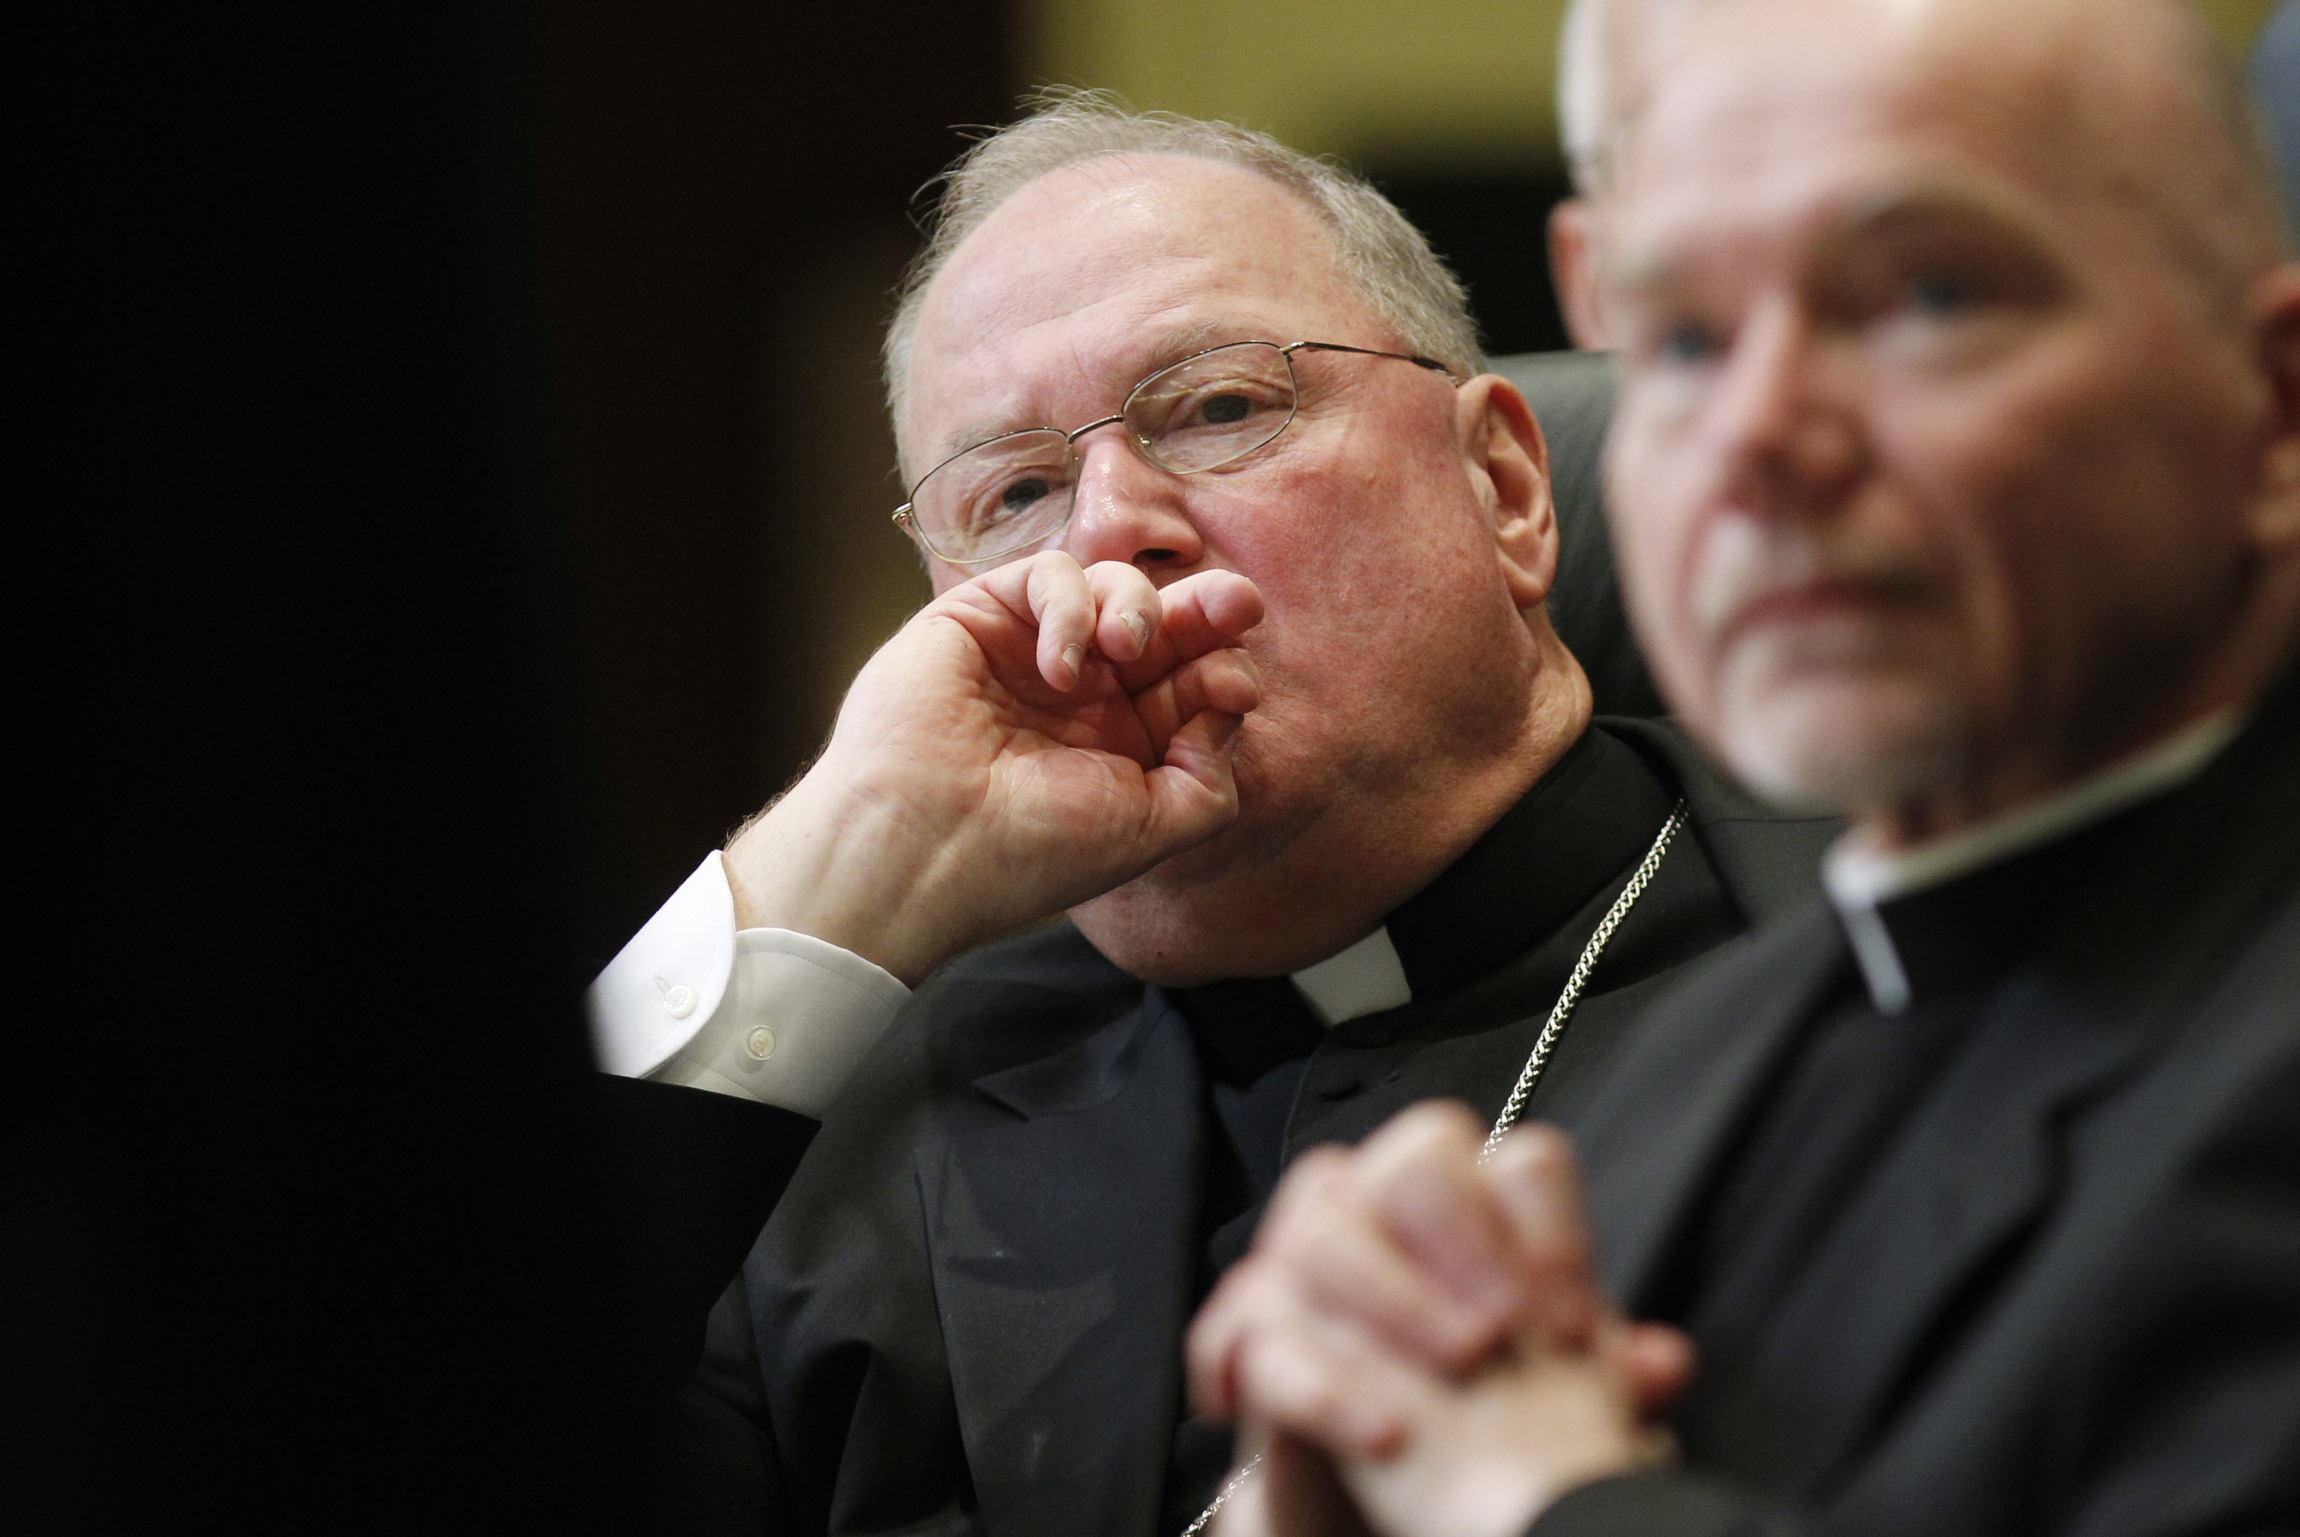 New York Cardinal Timothy M. Dolan listens to proceedings of the U.S. bishops' meeting in November in Baltimore. Cardinal Dolan, president of the U.S. Conference of Catholic Bishops, said in a Feb. 7 statement that the government's new set of proposed rules on insurance coverage of contraceptives falls short in meeting concerns of the church. (CNS photo/Nancy Phelan Wiechec)